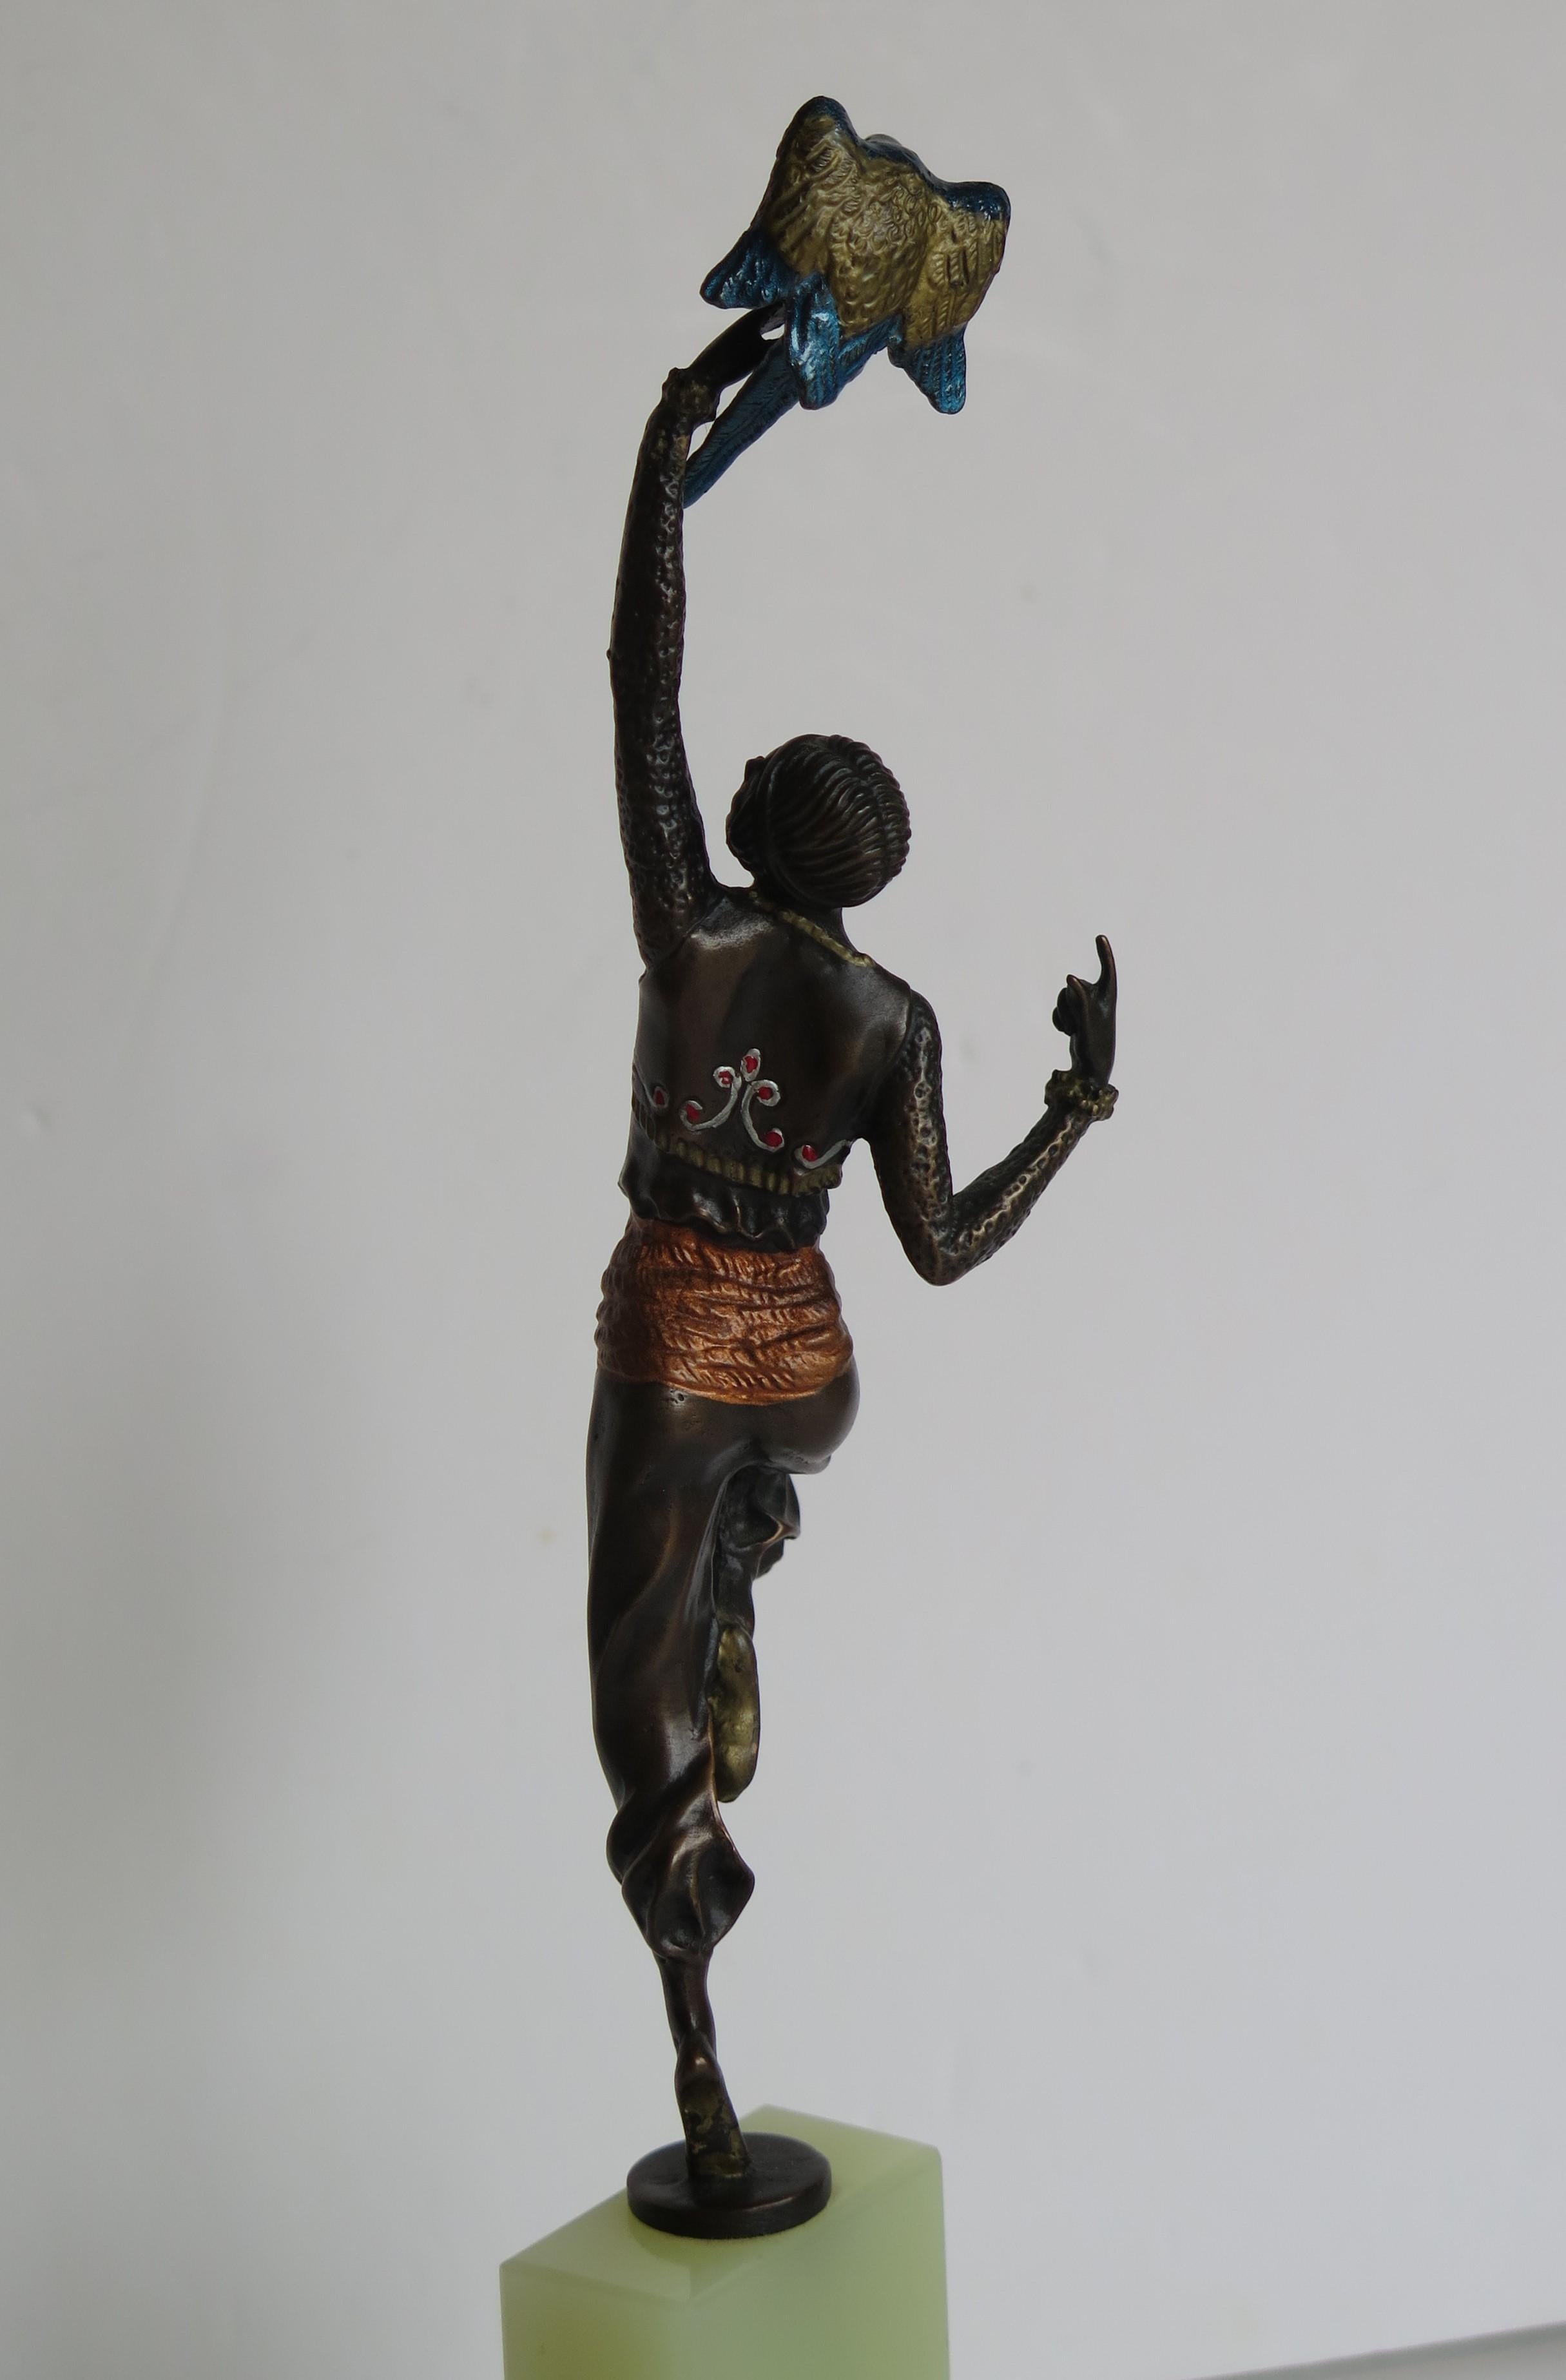 Hand-Crafted Bronze Figurine Sculpture by or after Paul Philippe La Danseur Perroquet, Ca1920 For Sale